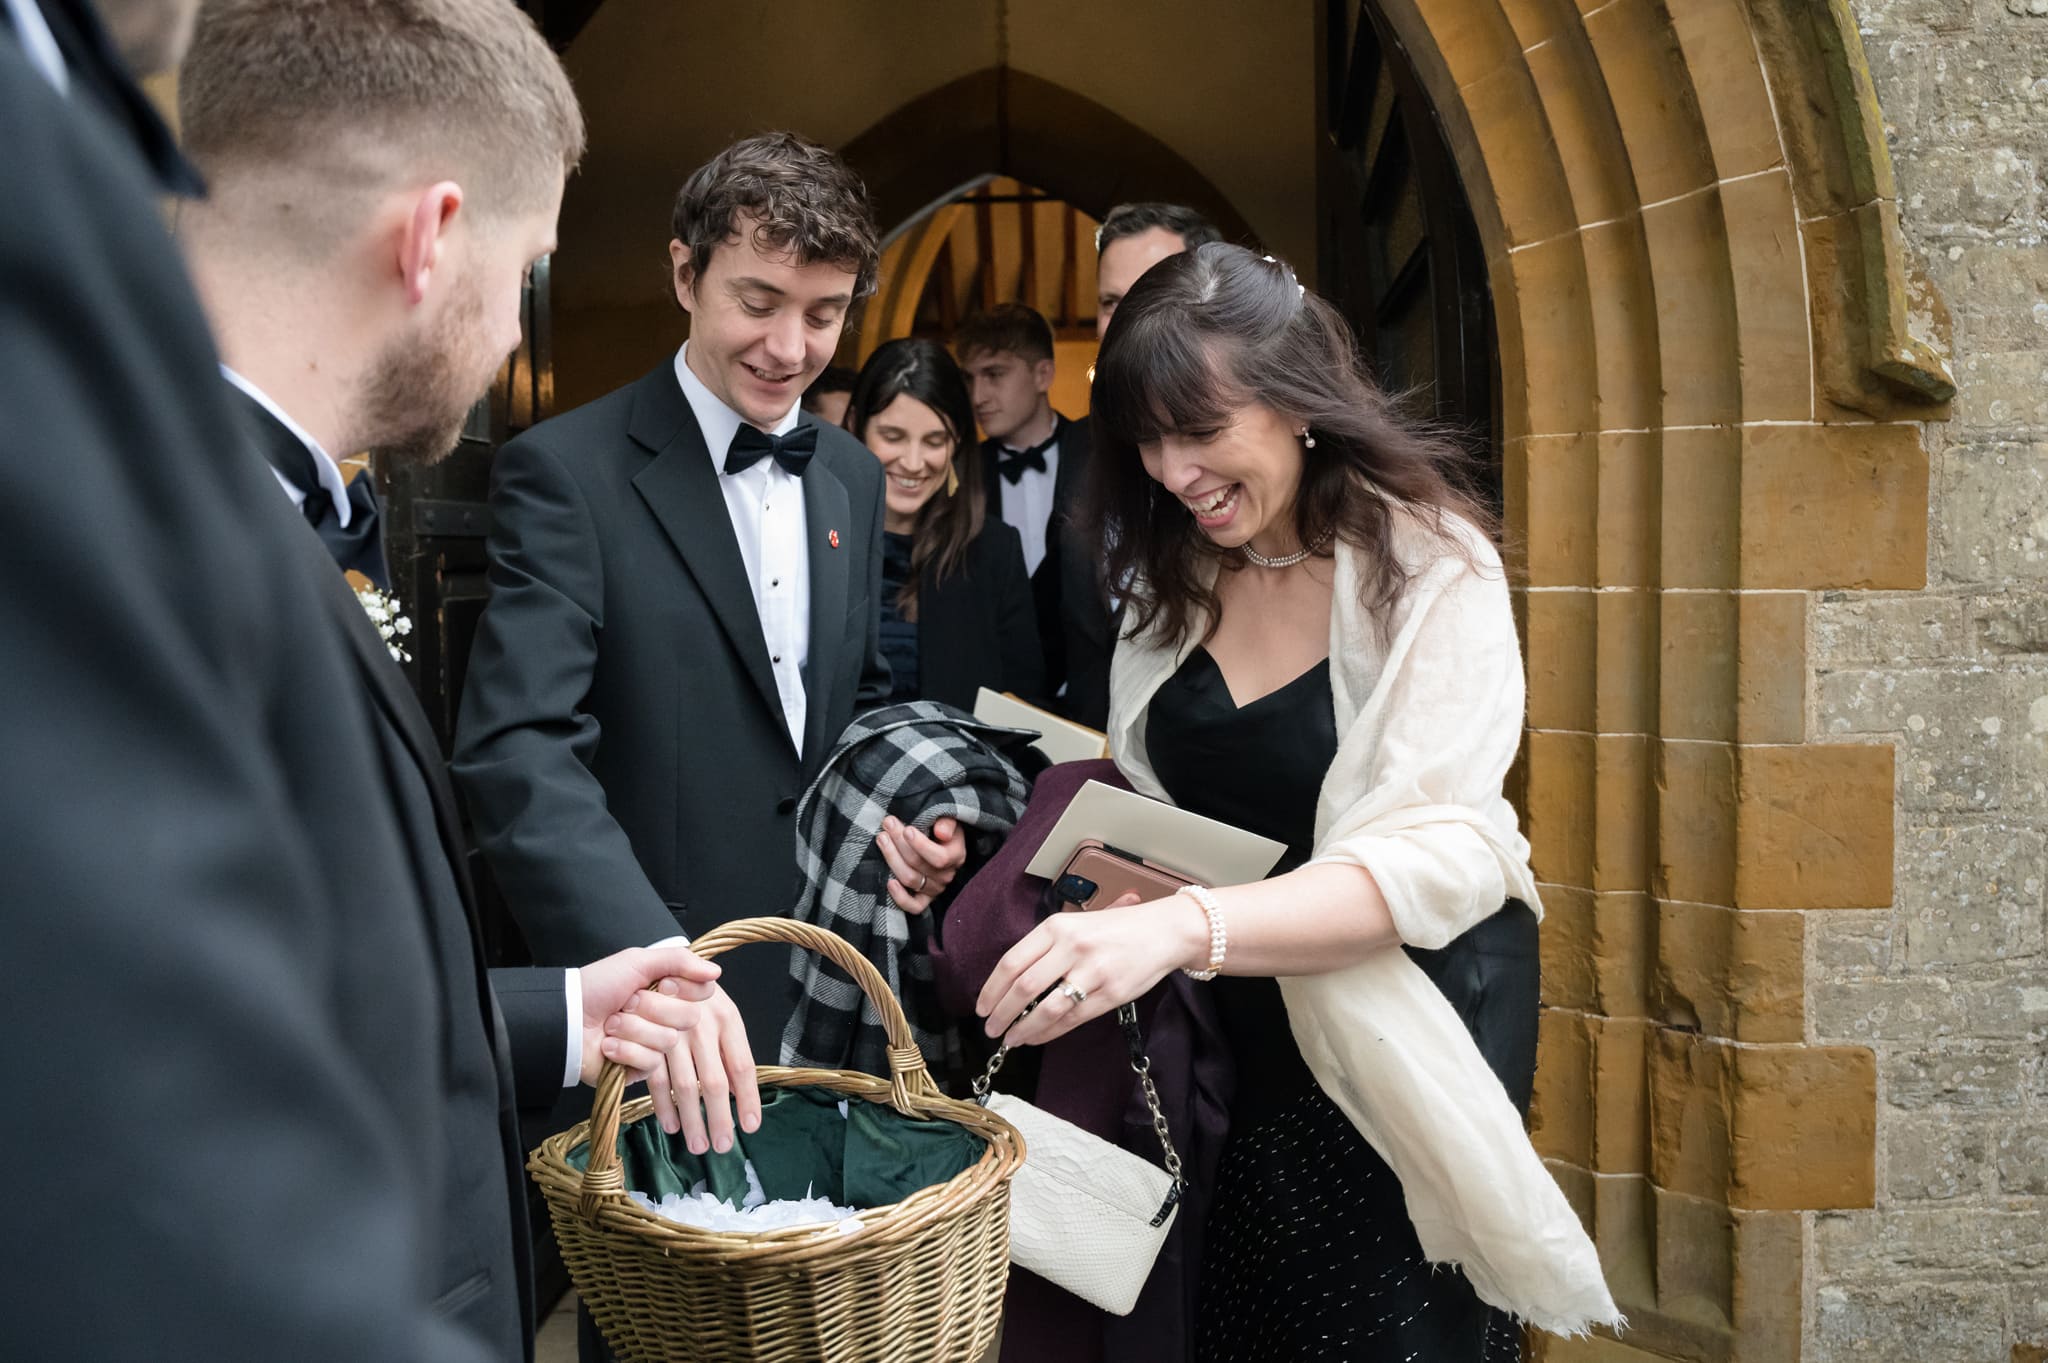 Guests taking confetti from a basket